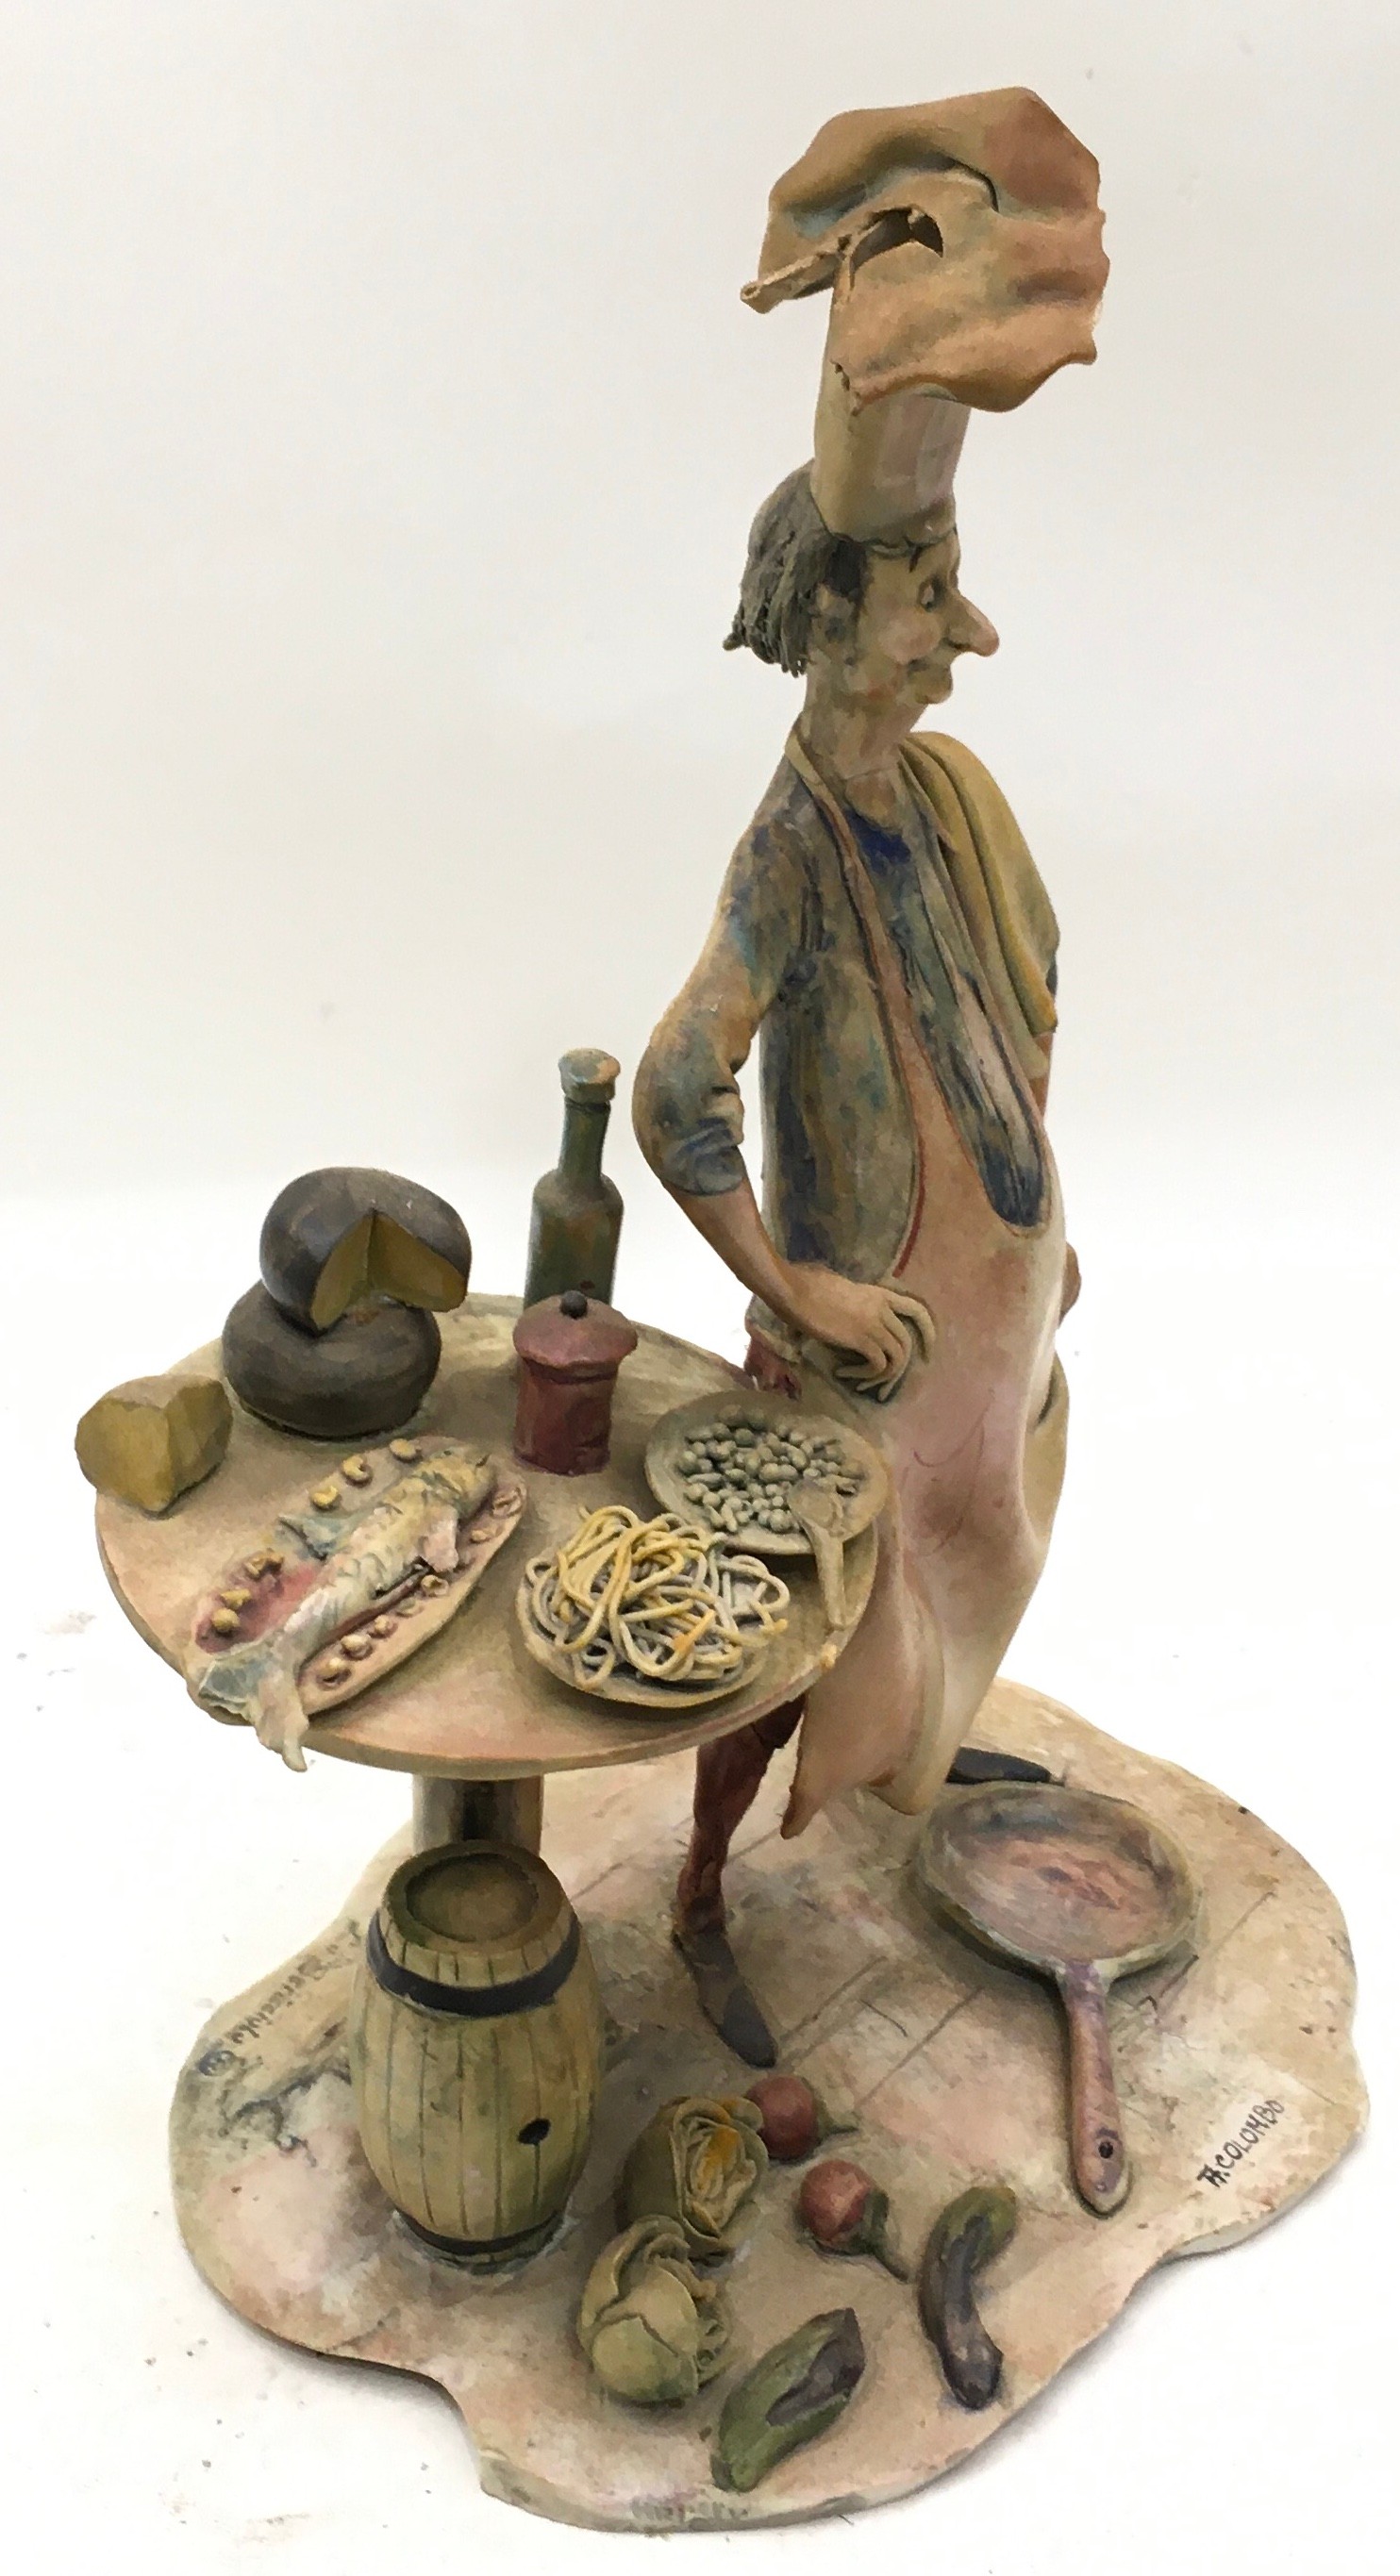 Vintage large porcelain Lo Scricciolo hand made figure of a chef signed by A. Colombo. Figure approx - Image 2 of 6